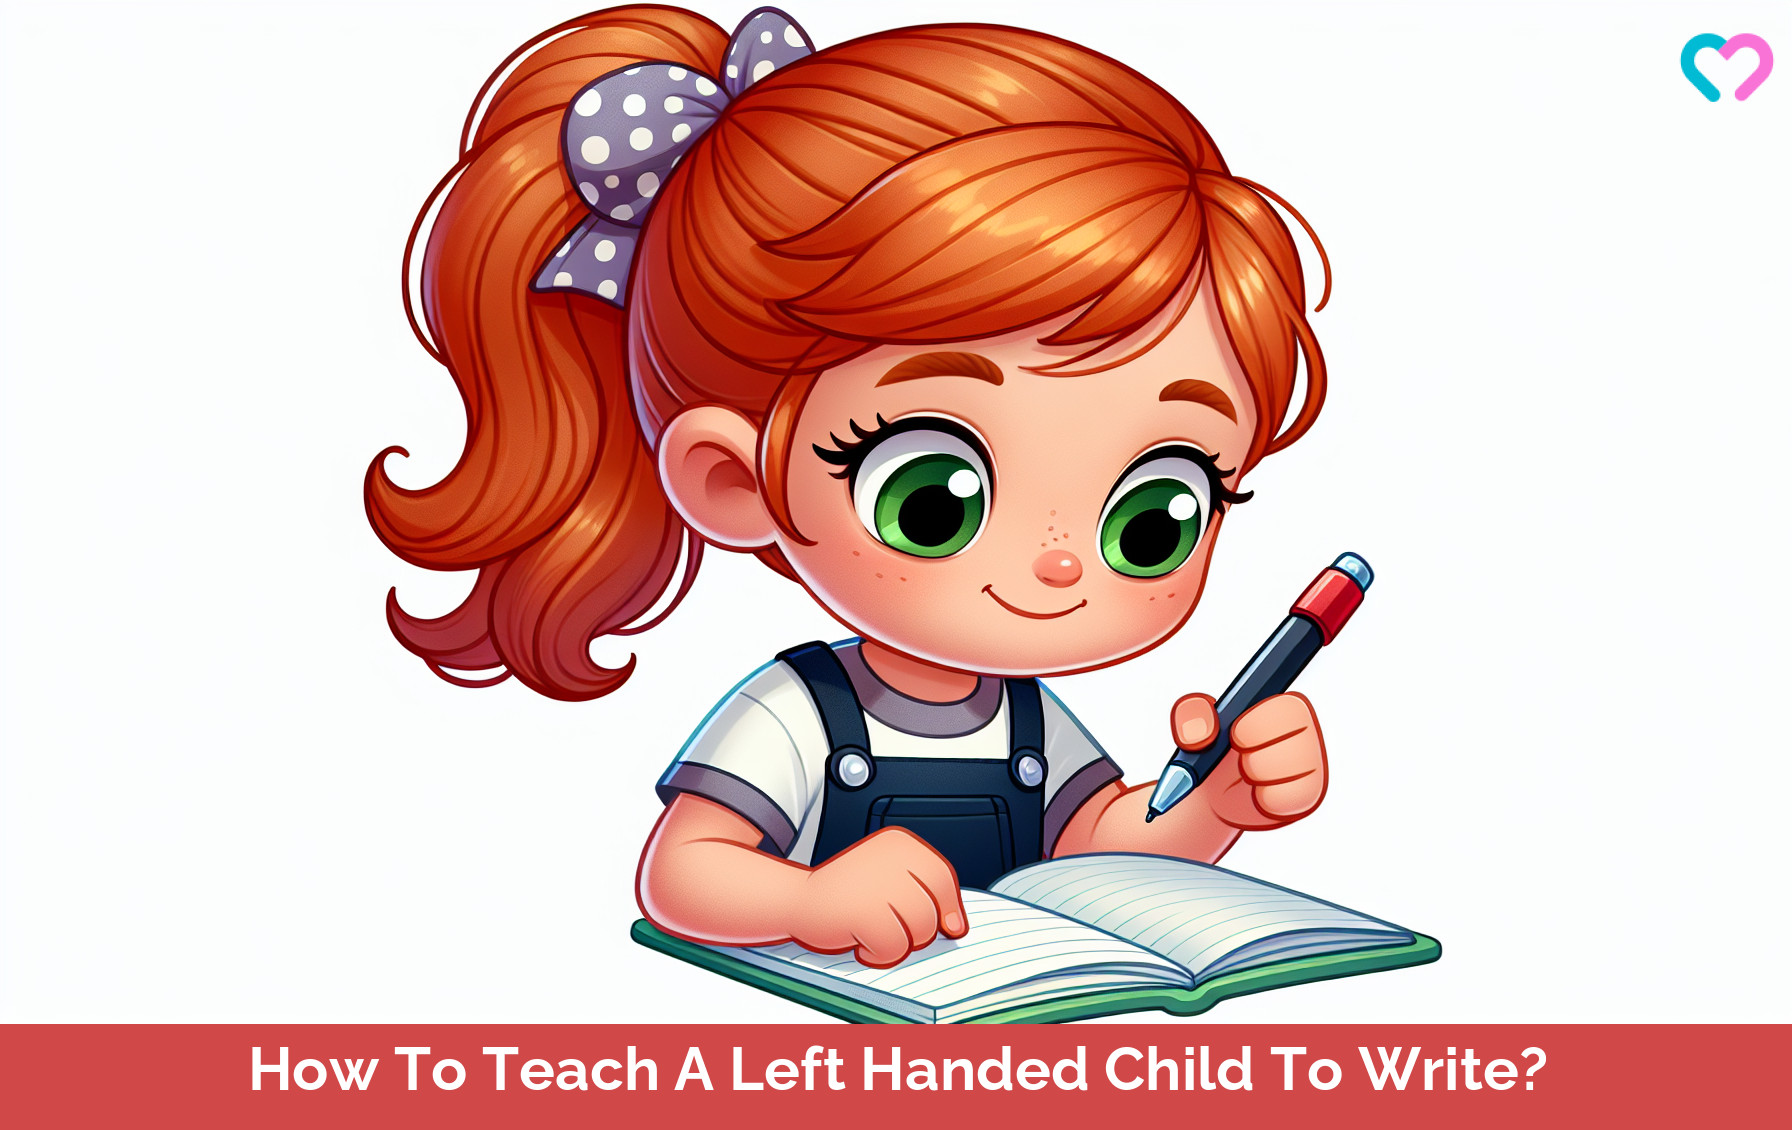 How To Teach A Left Handed Child To Write_illustration